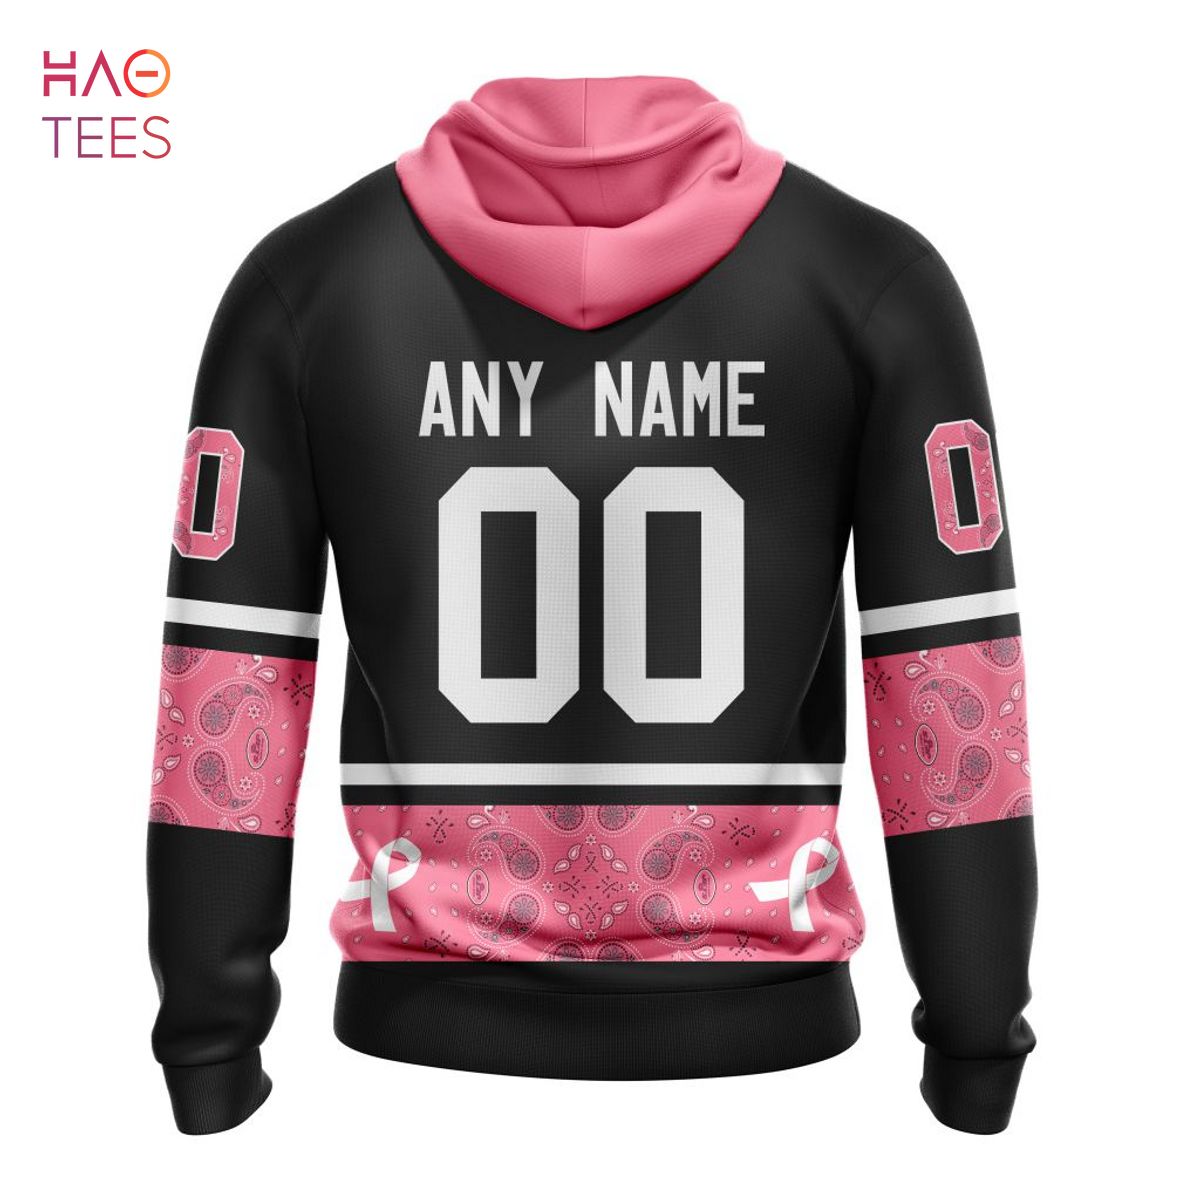 BEST NFL New York Jets, Specialized Design In Classic Style With Paisley! IN OCTOBER WE WEAR PINK BREAST CANCER 3D Hoodie